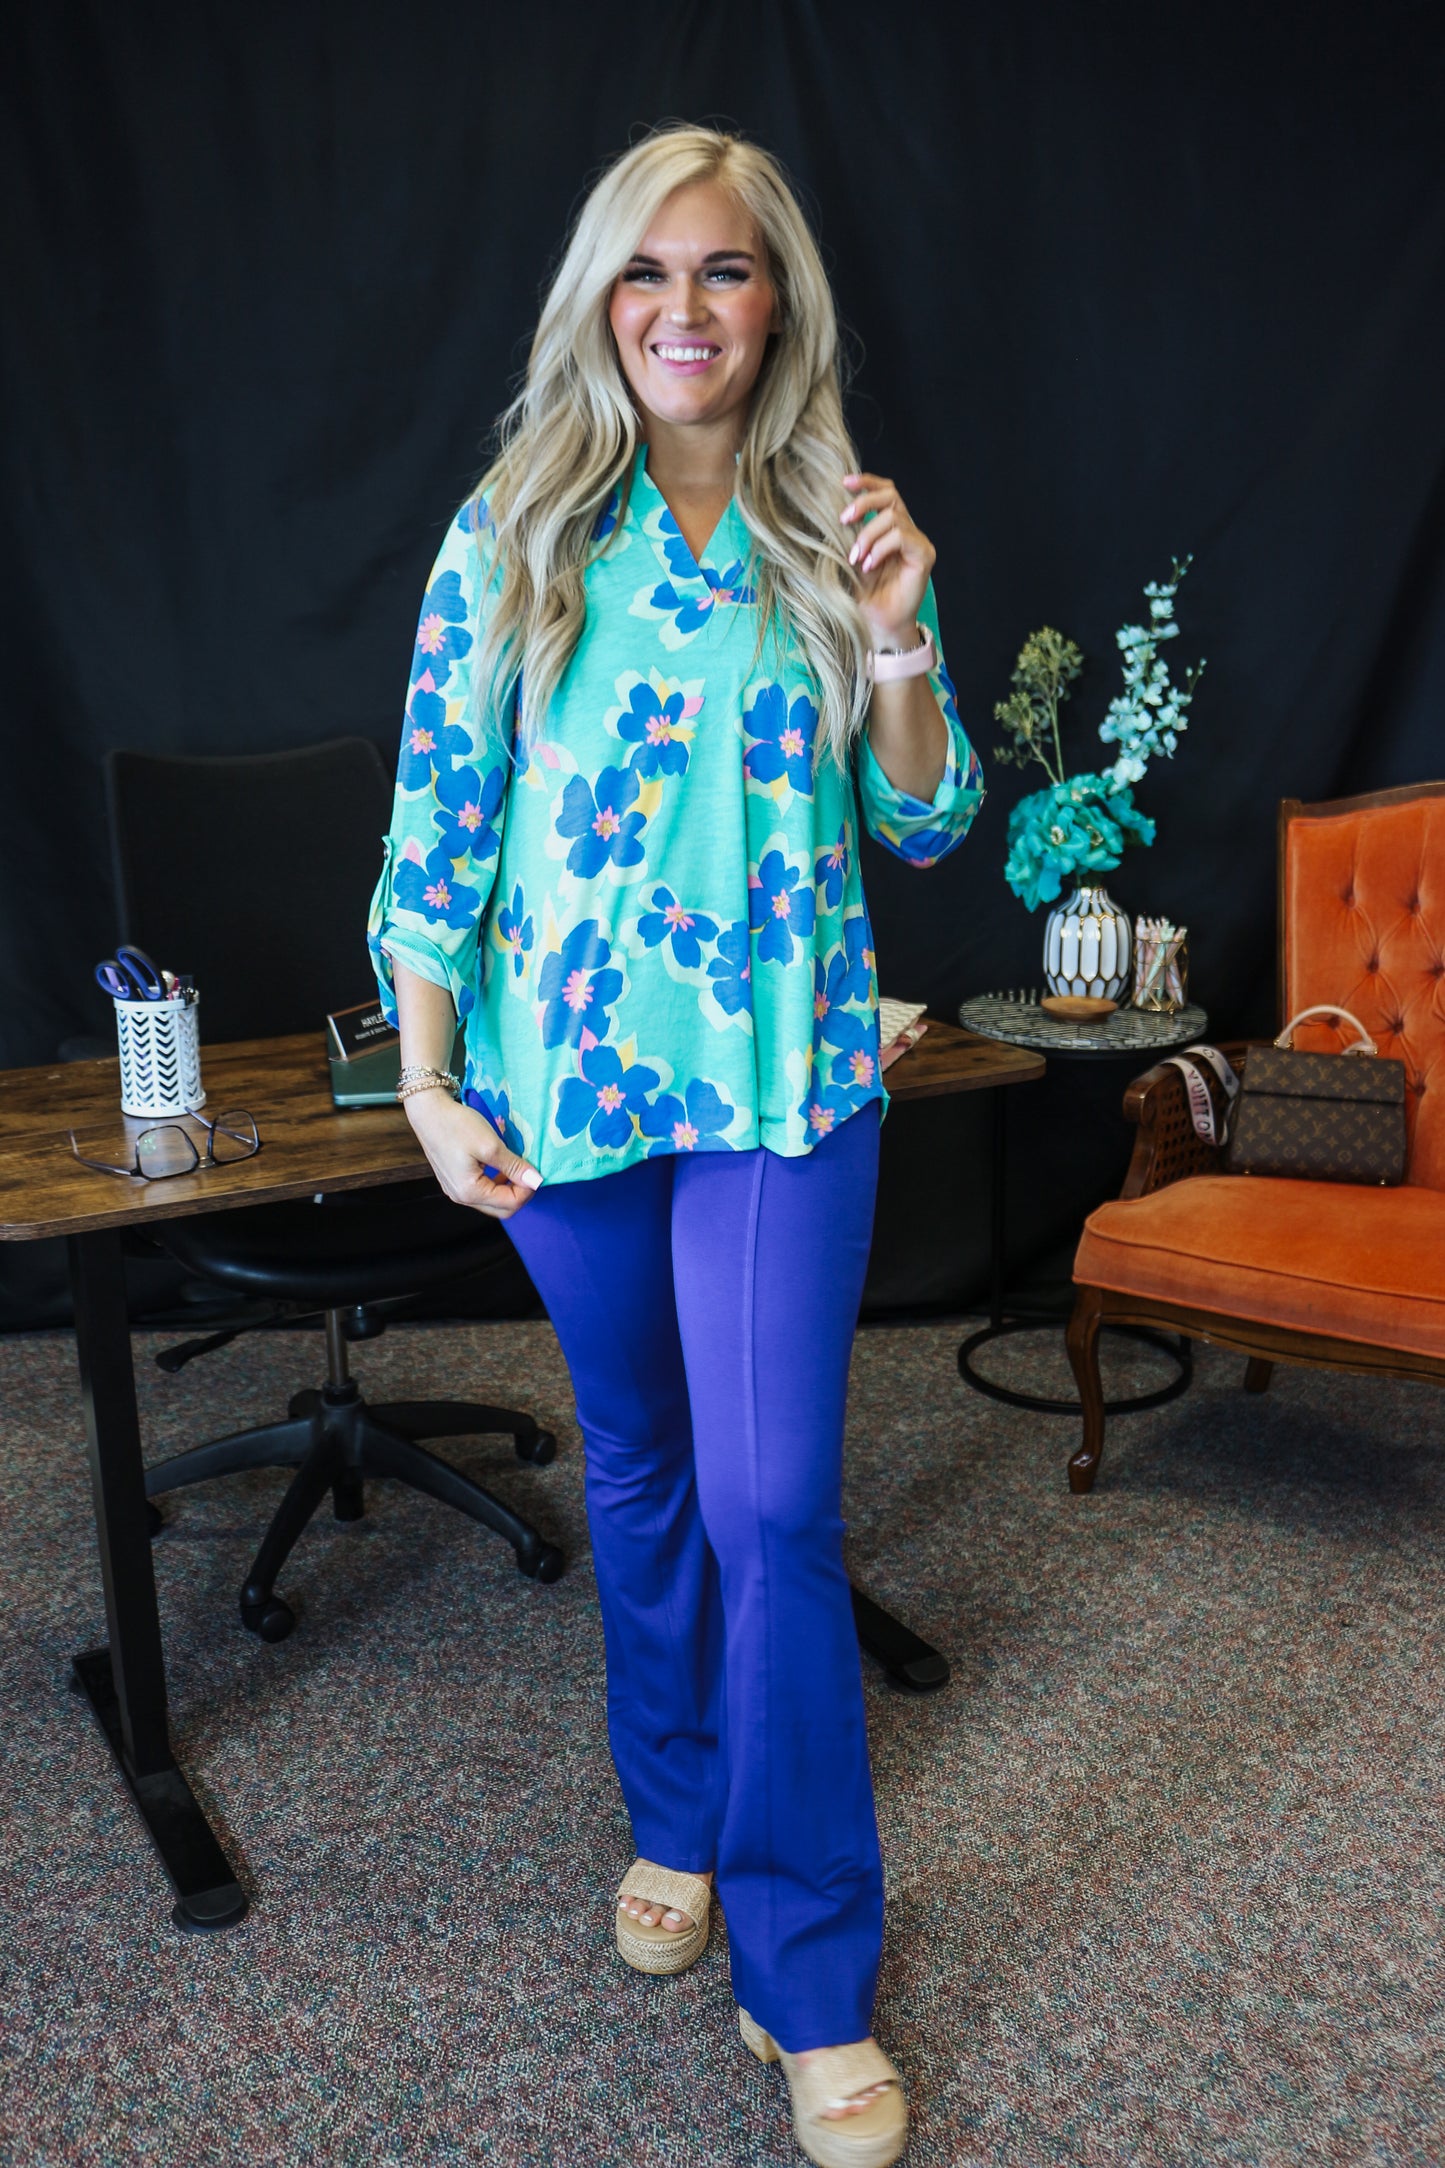 The Lizzy Emerald Floral Top